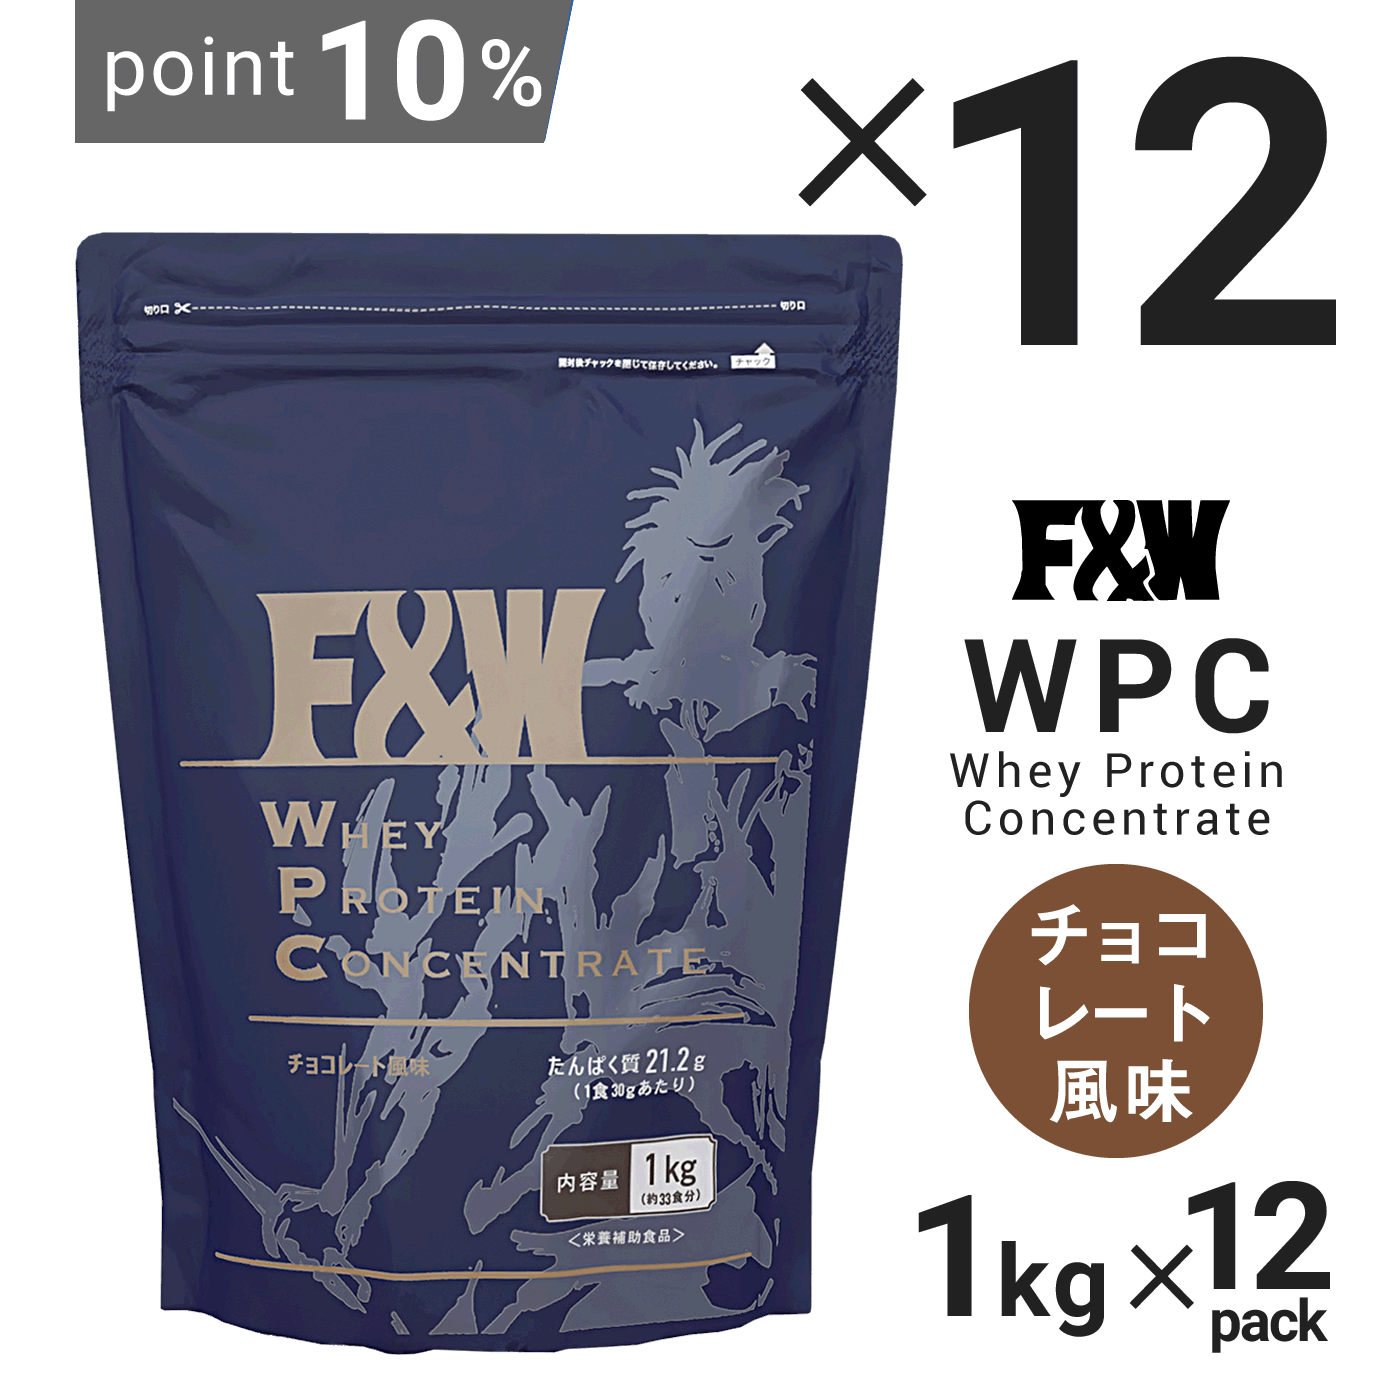 WPC　1Kg　12個セット チョコレート風味